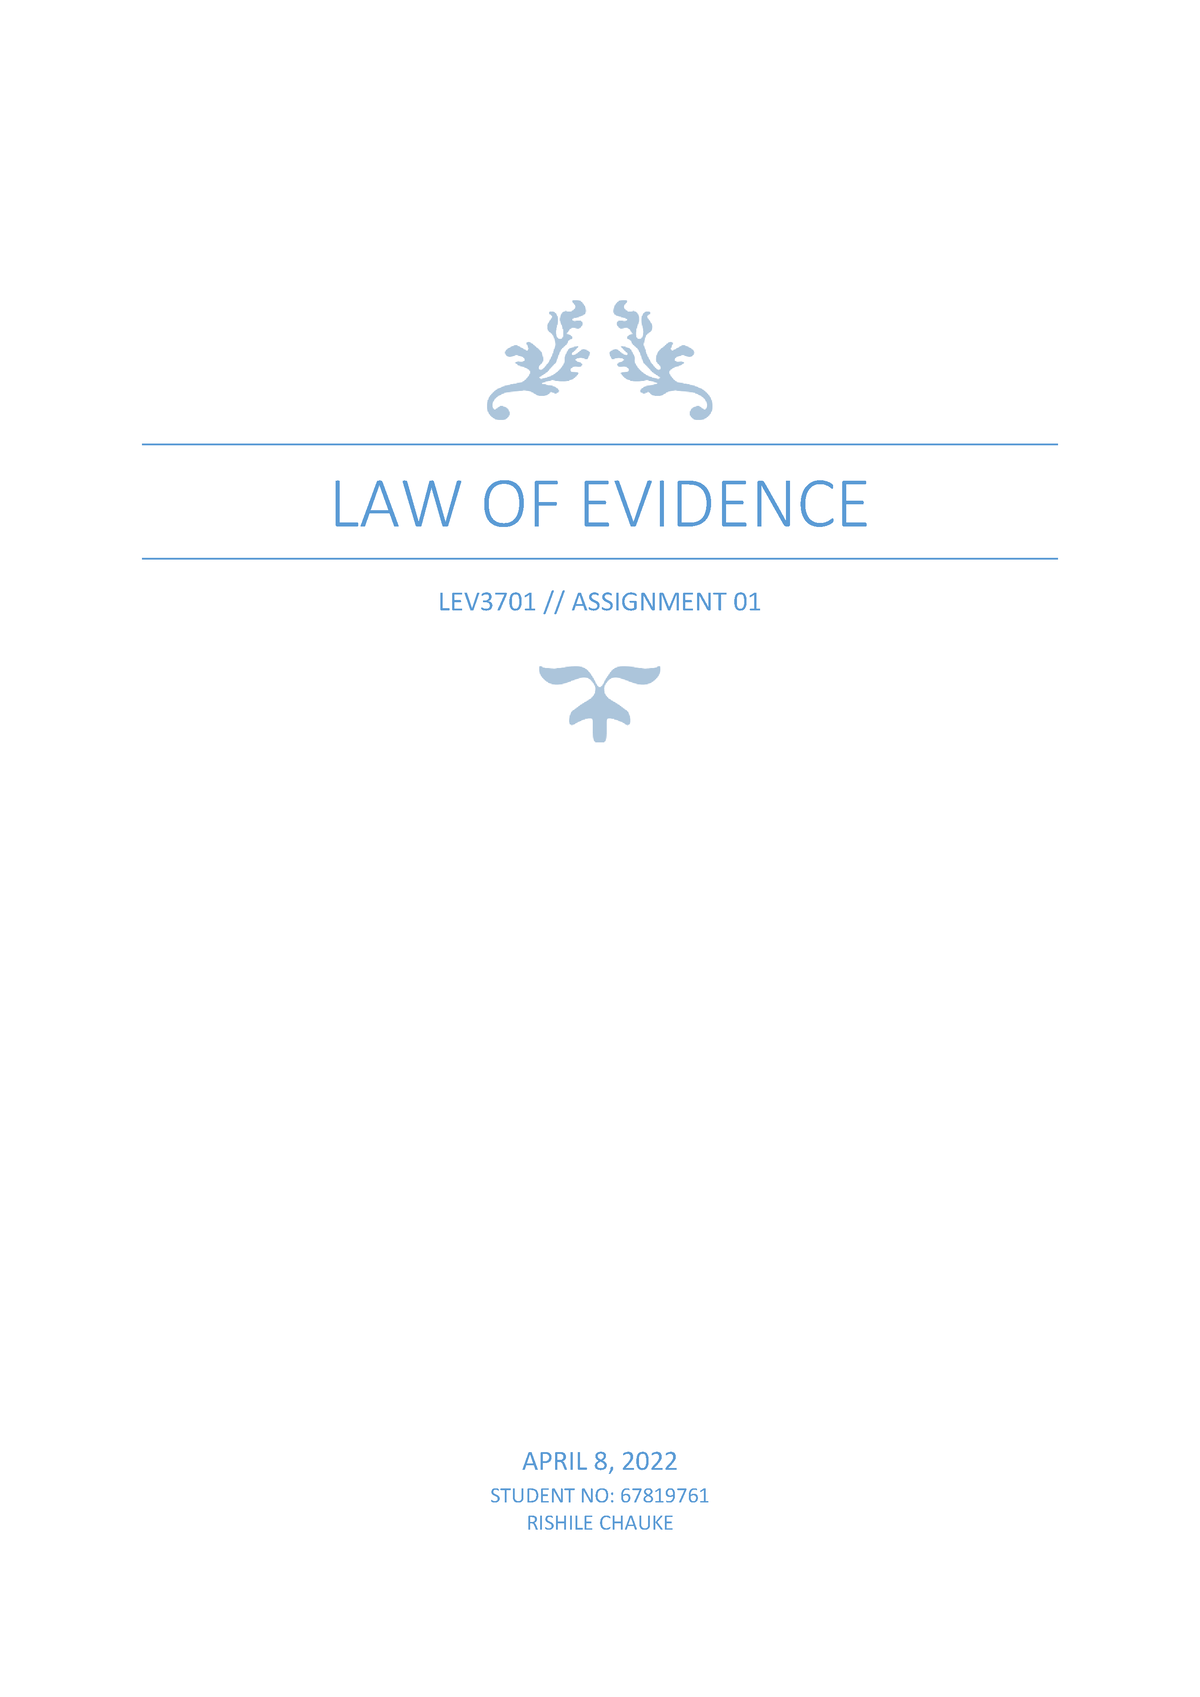 law of evidence assignment 1 2022